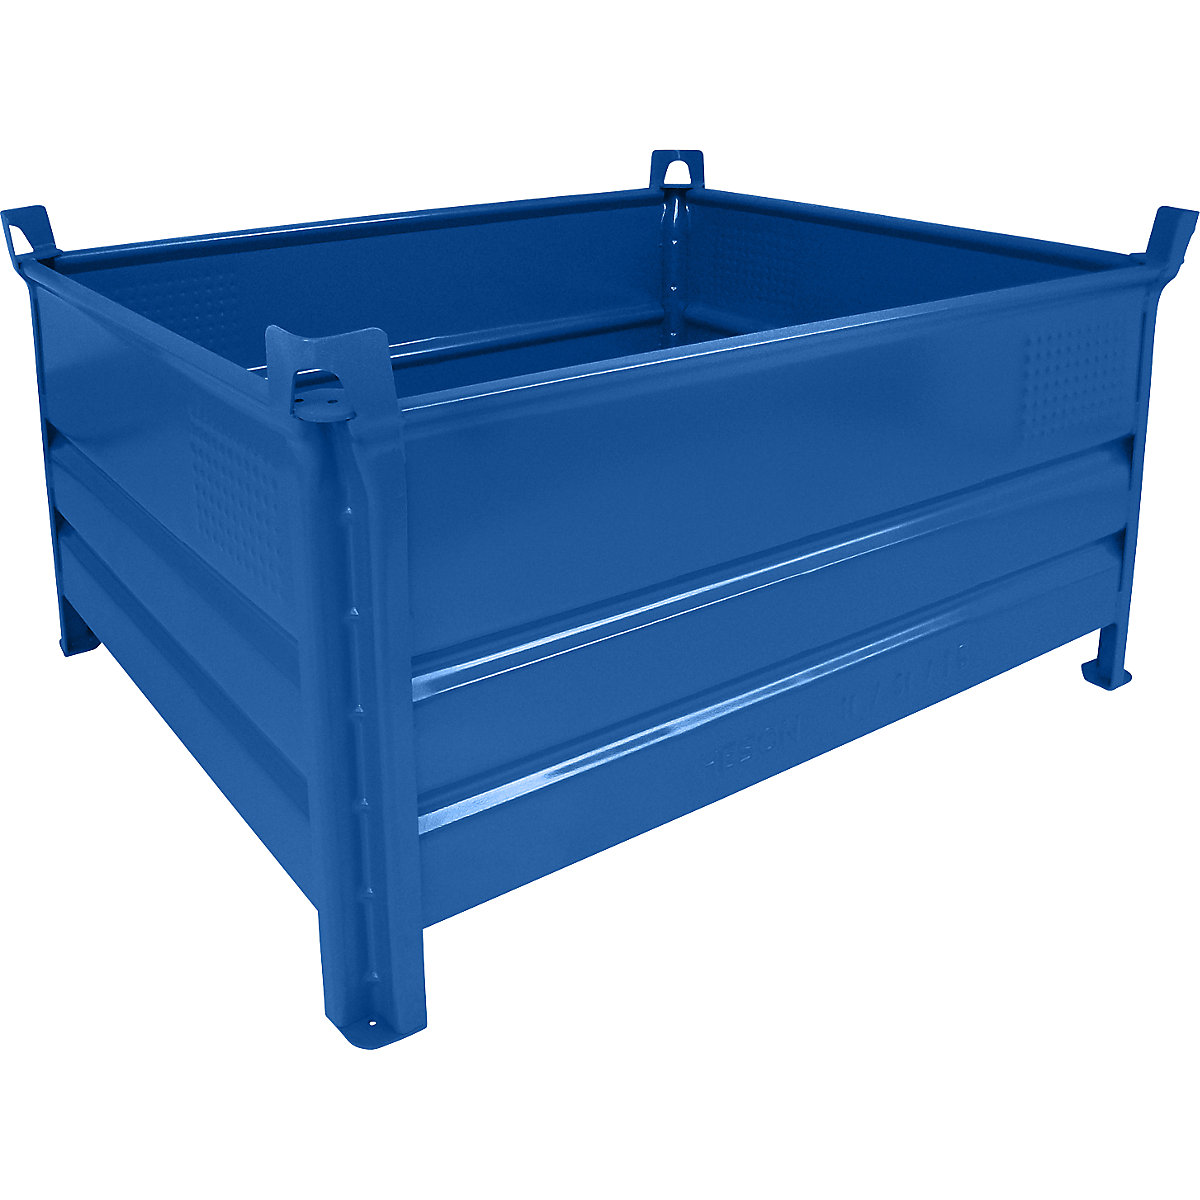 Solid panel box pallet – Heson, WxL 1000 x 1200 mm, max. load 500 kg, blue, 1+ items-8